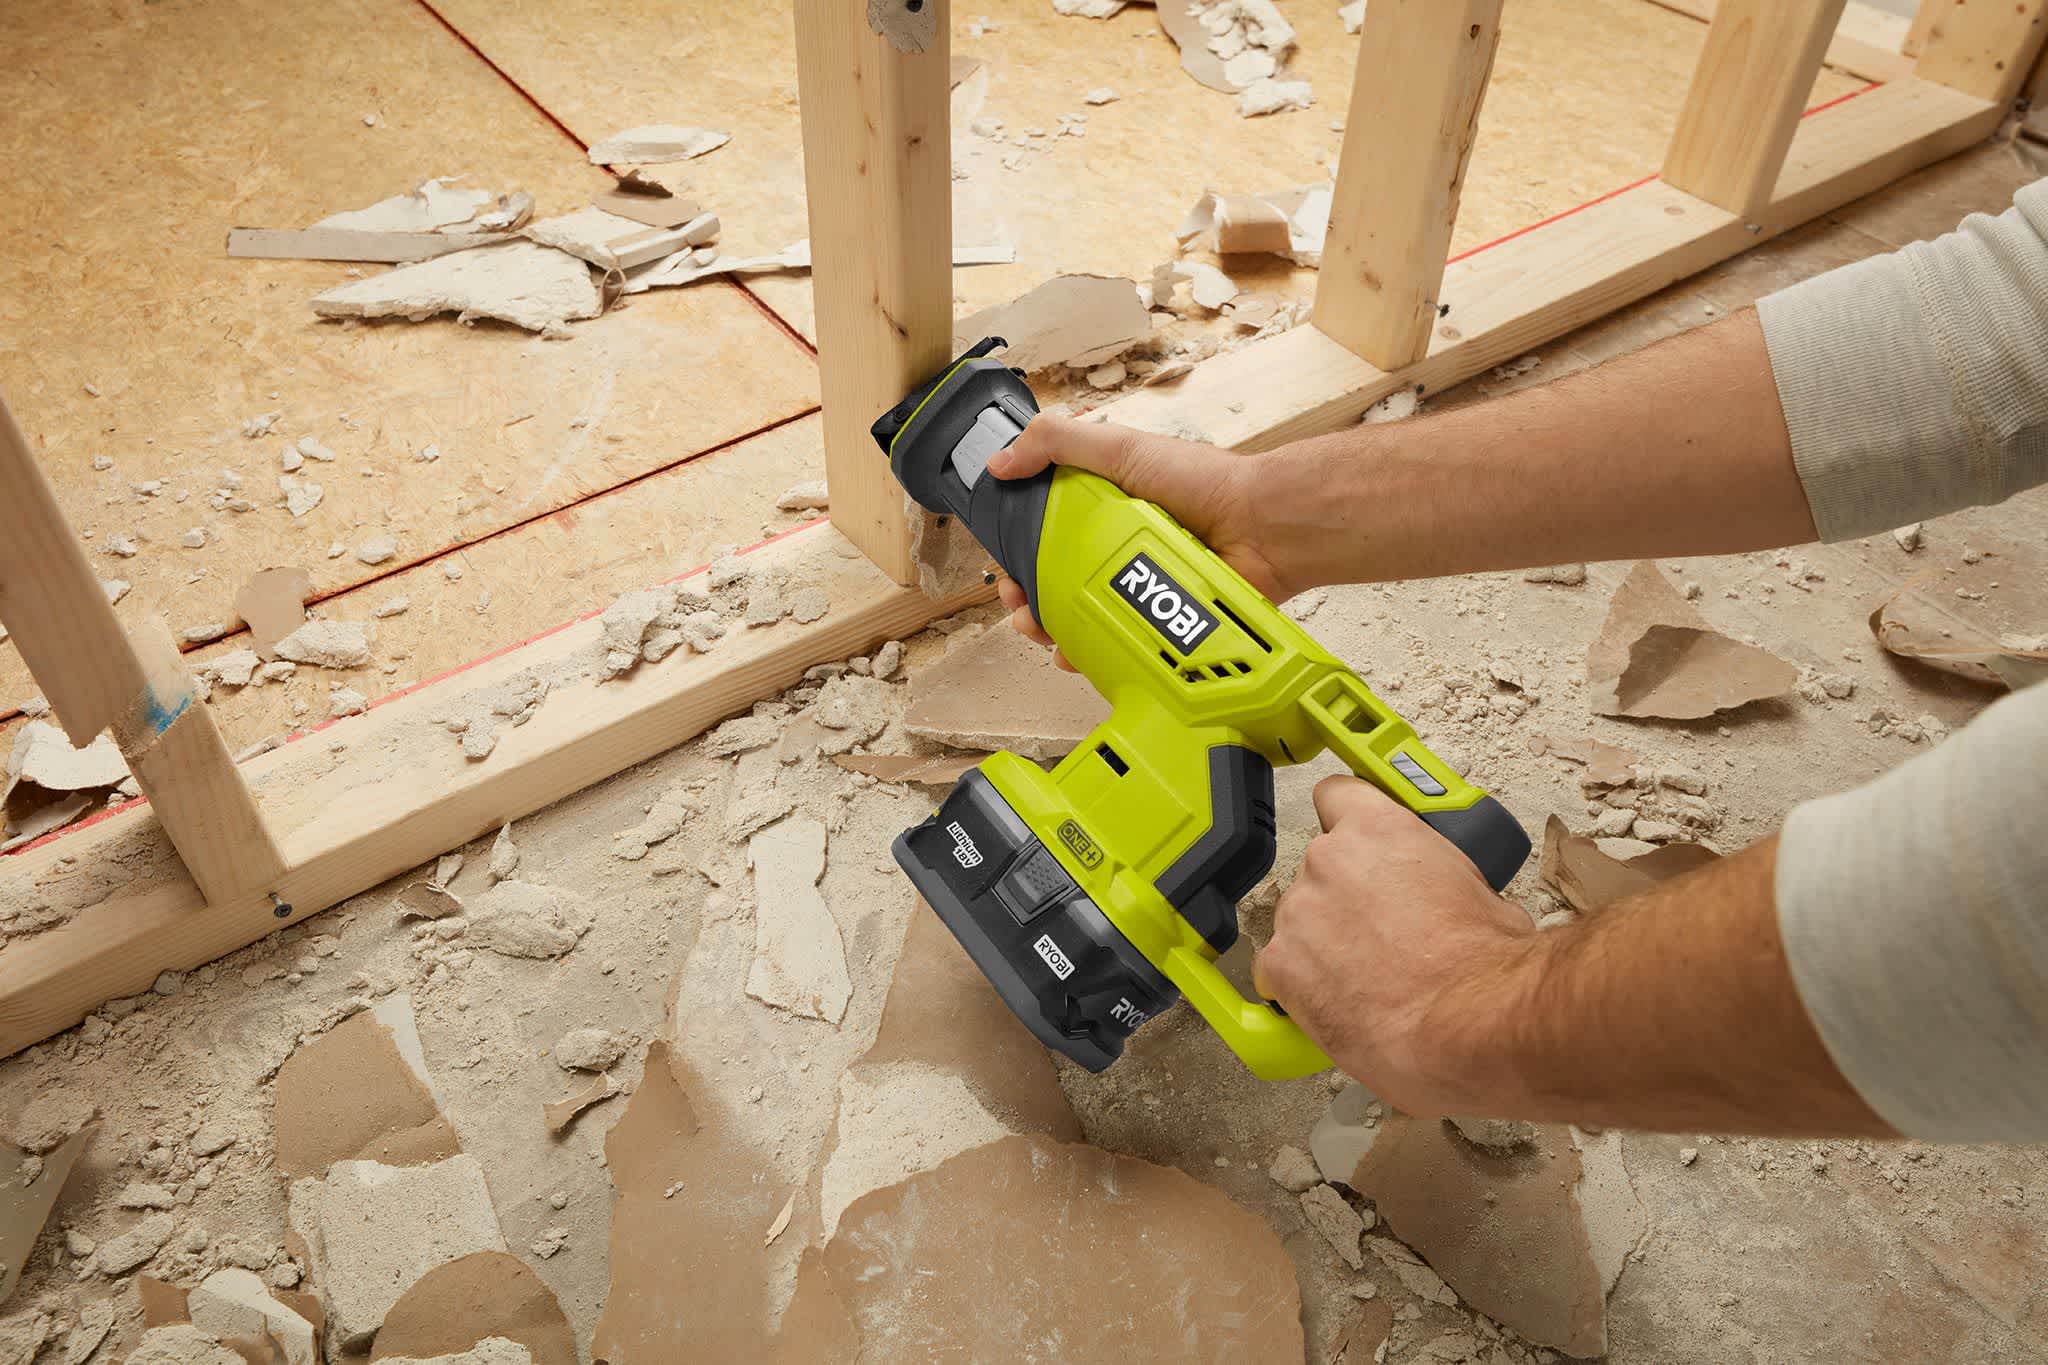 Product Features Image for 18V ONE+ LITHIUM-ION CORDLESS 1/2" DRILL/DRIVER AND RECIPROCATING SAW KIT.